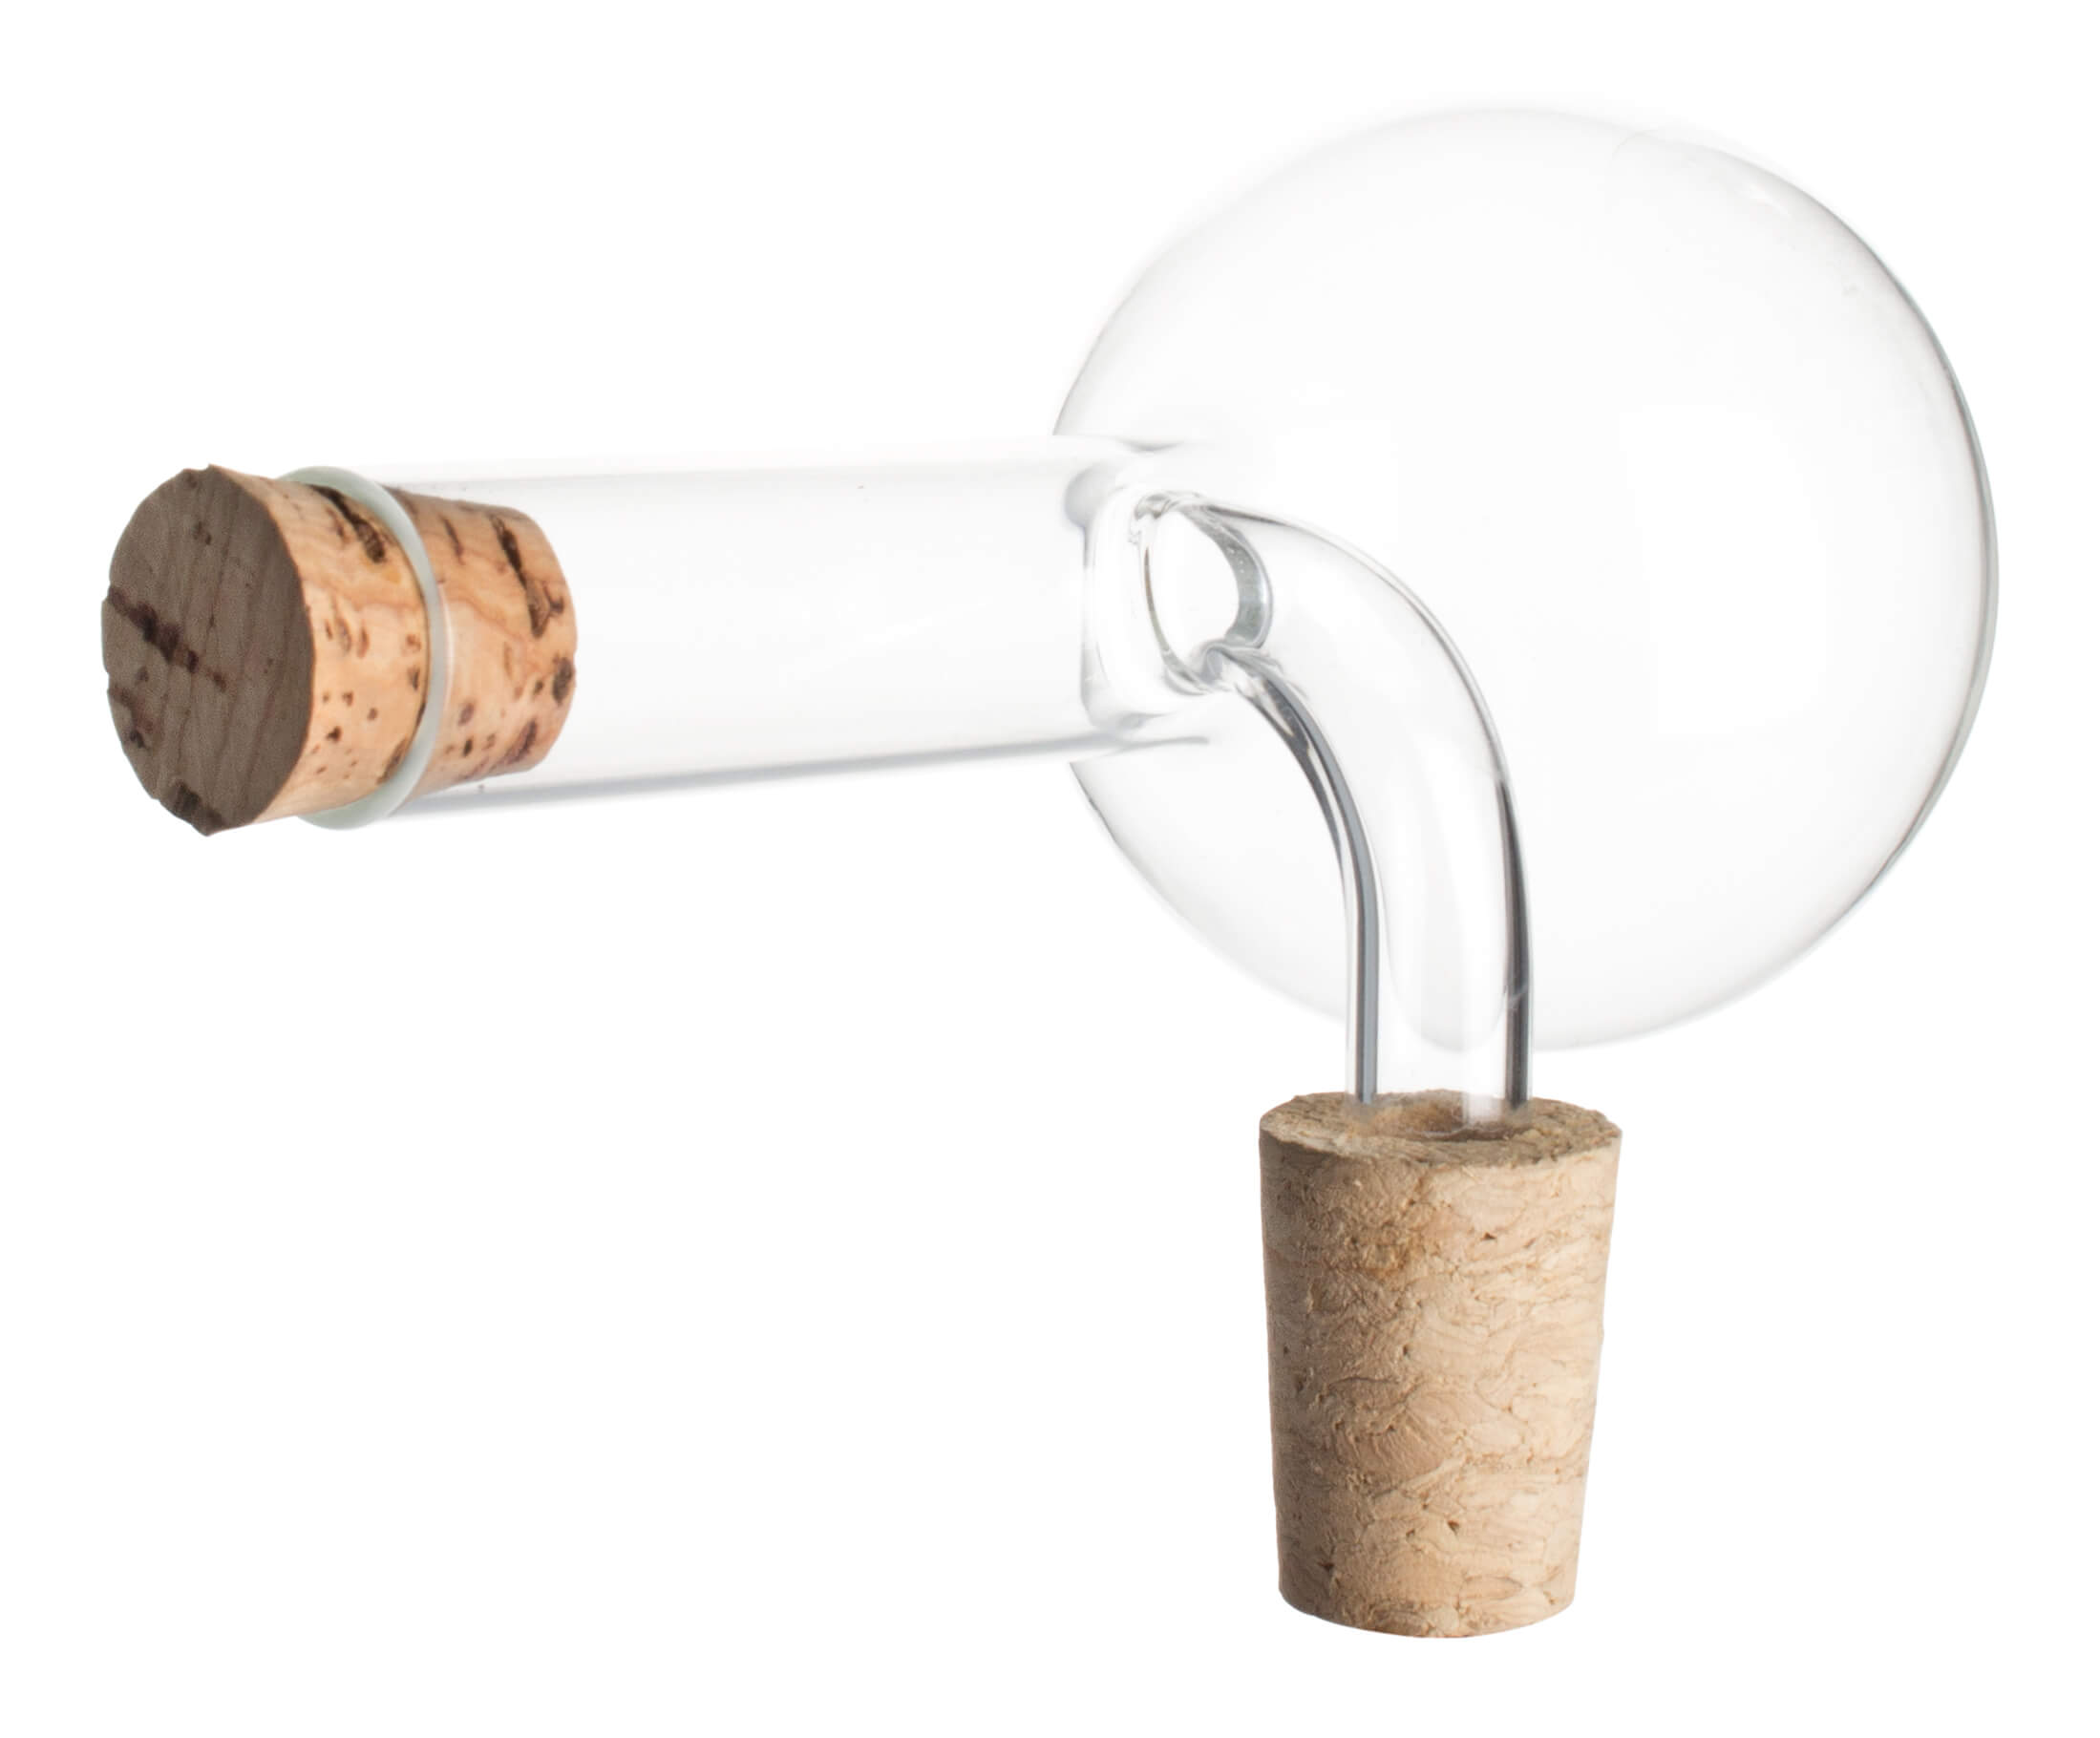 Portioner 100ml, with stopper - glass, natural cork